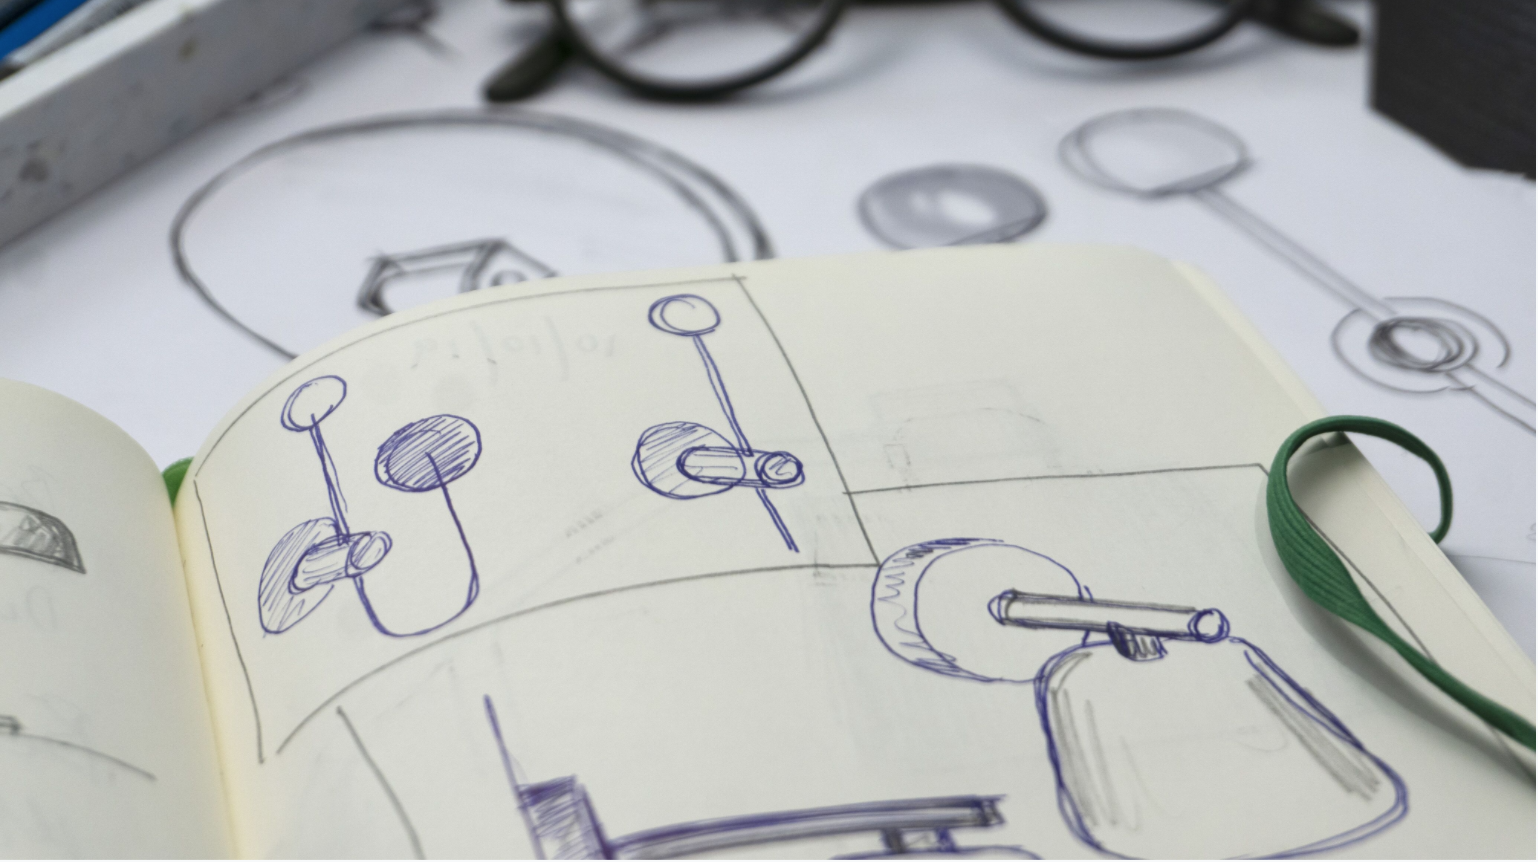 Sketching product design